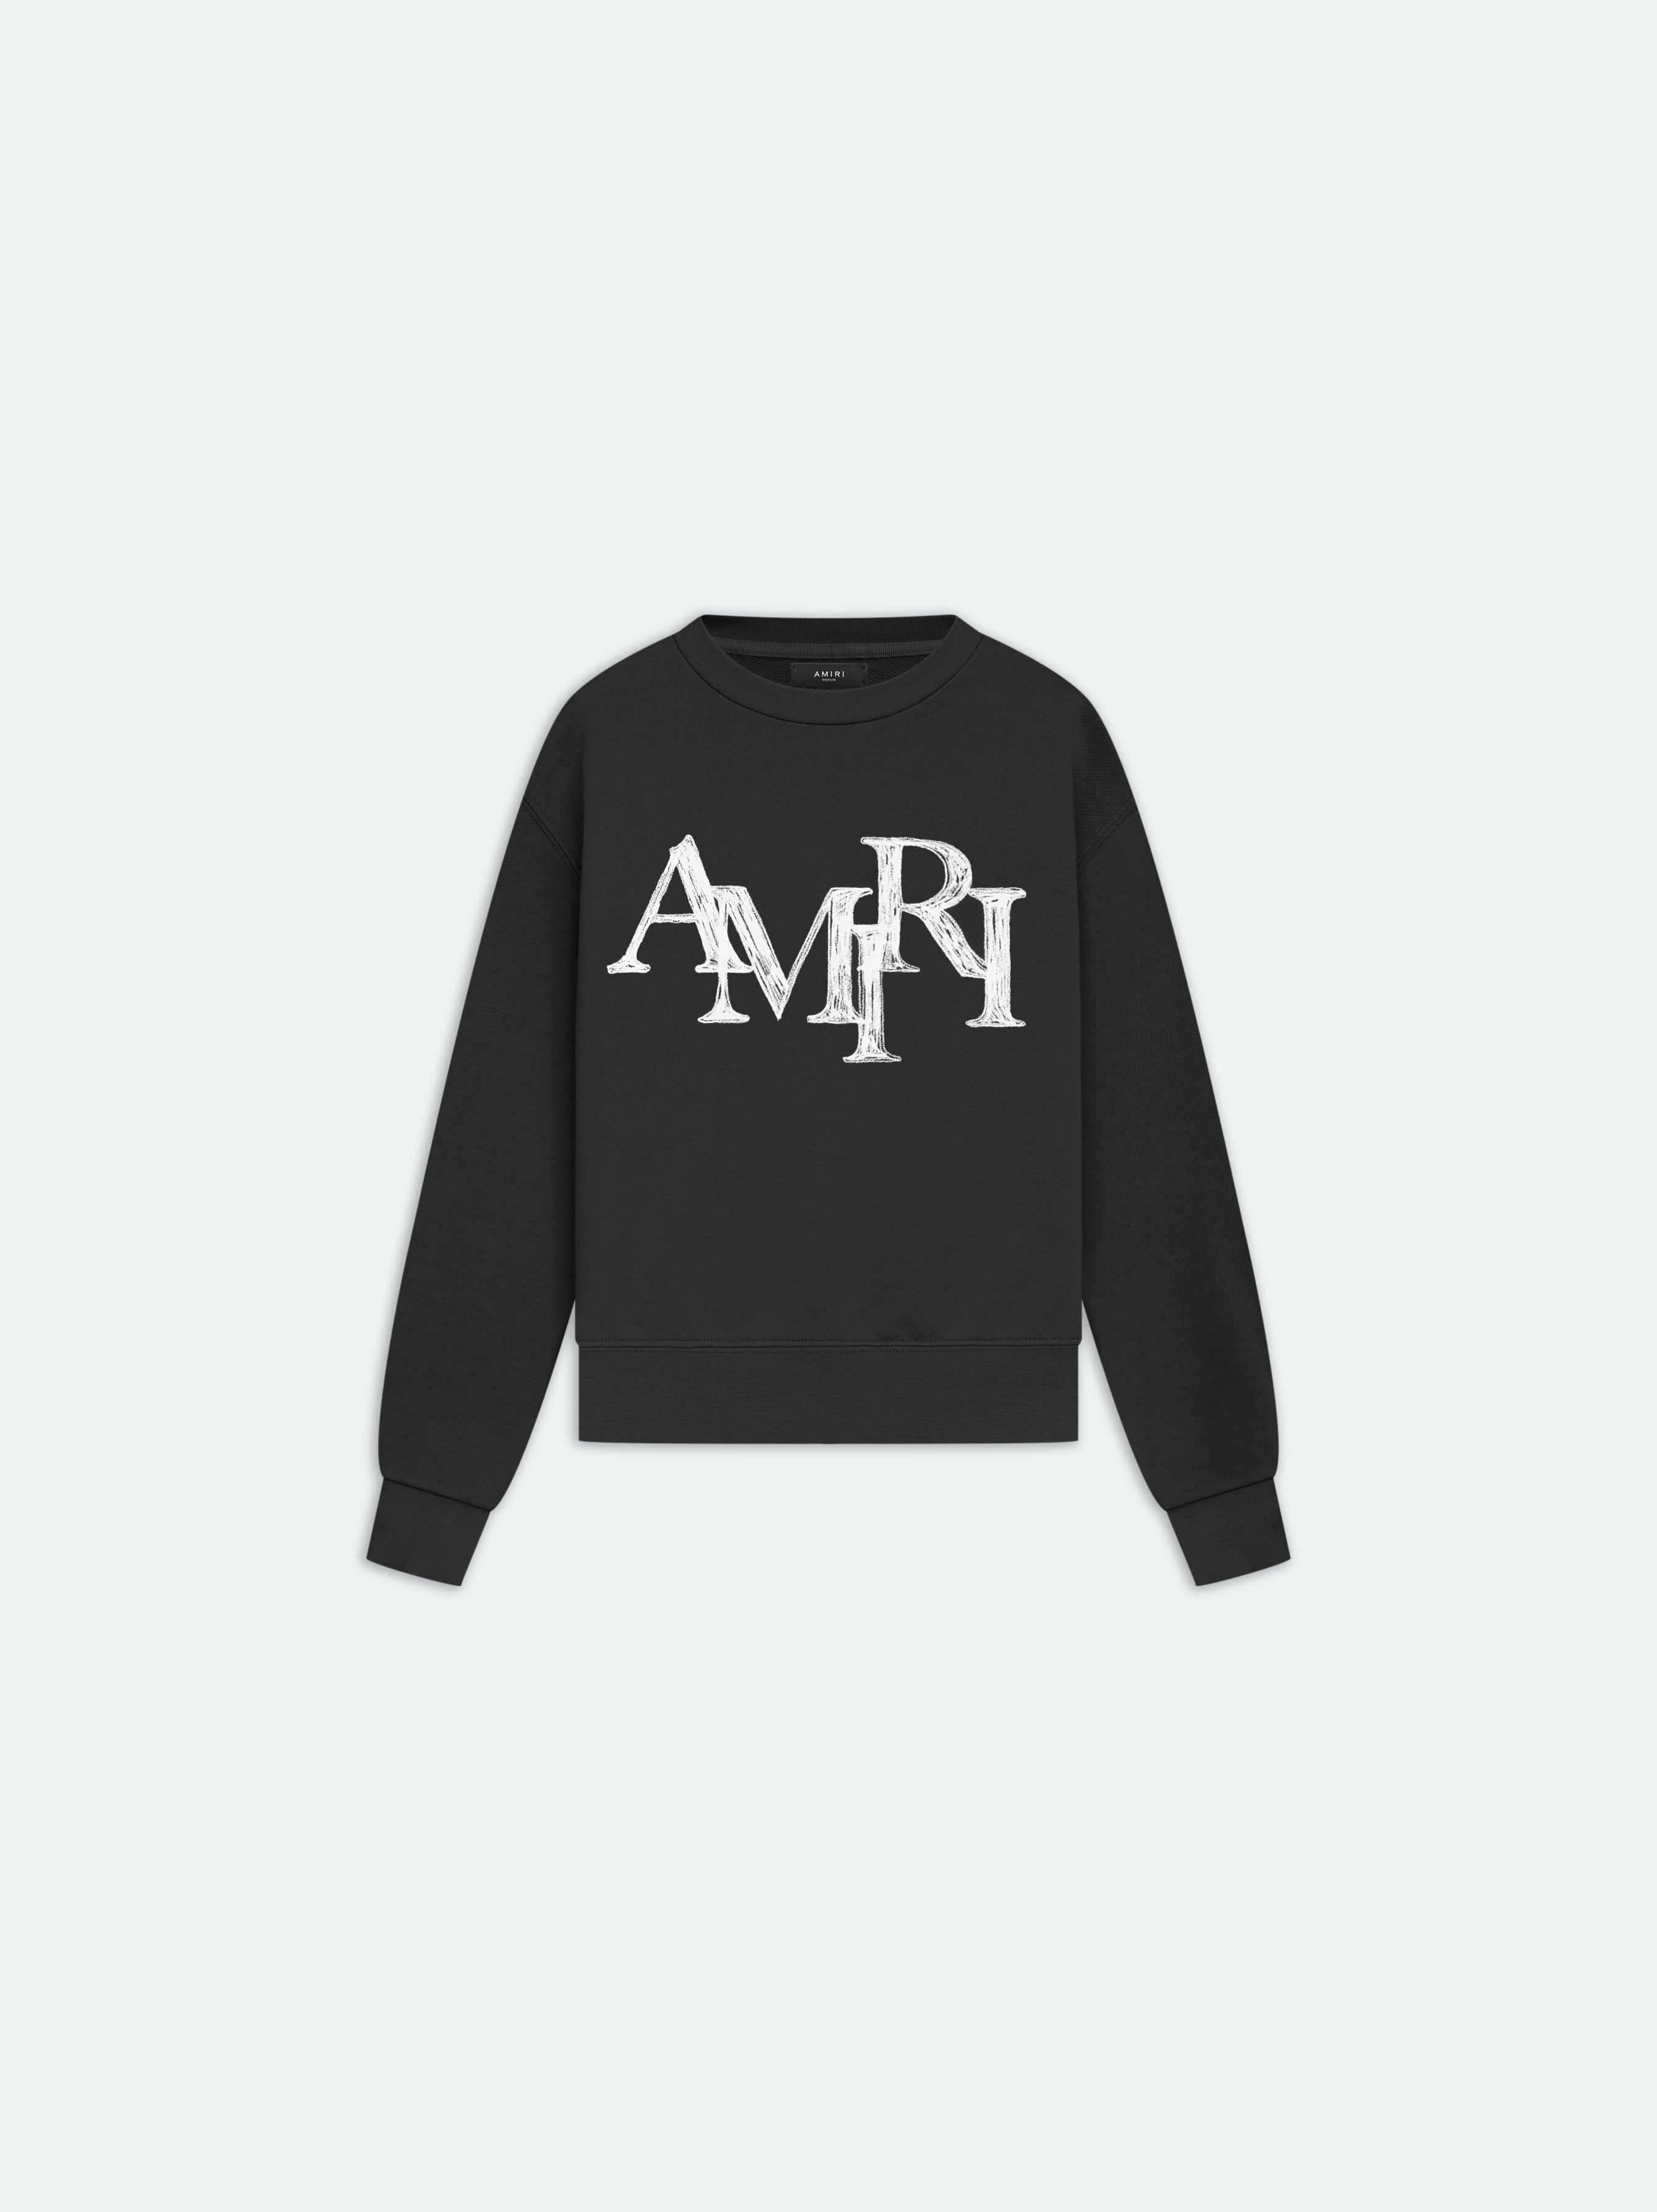 Product KIDS - AMIRI STAGGERED SCRIBBLE CREWNECK - Black featured image